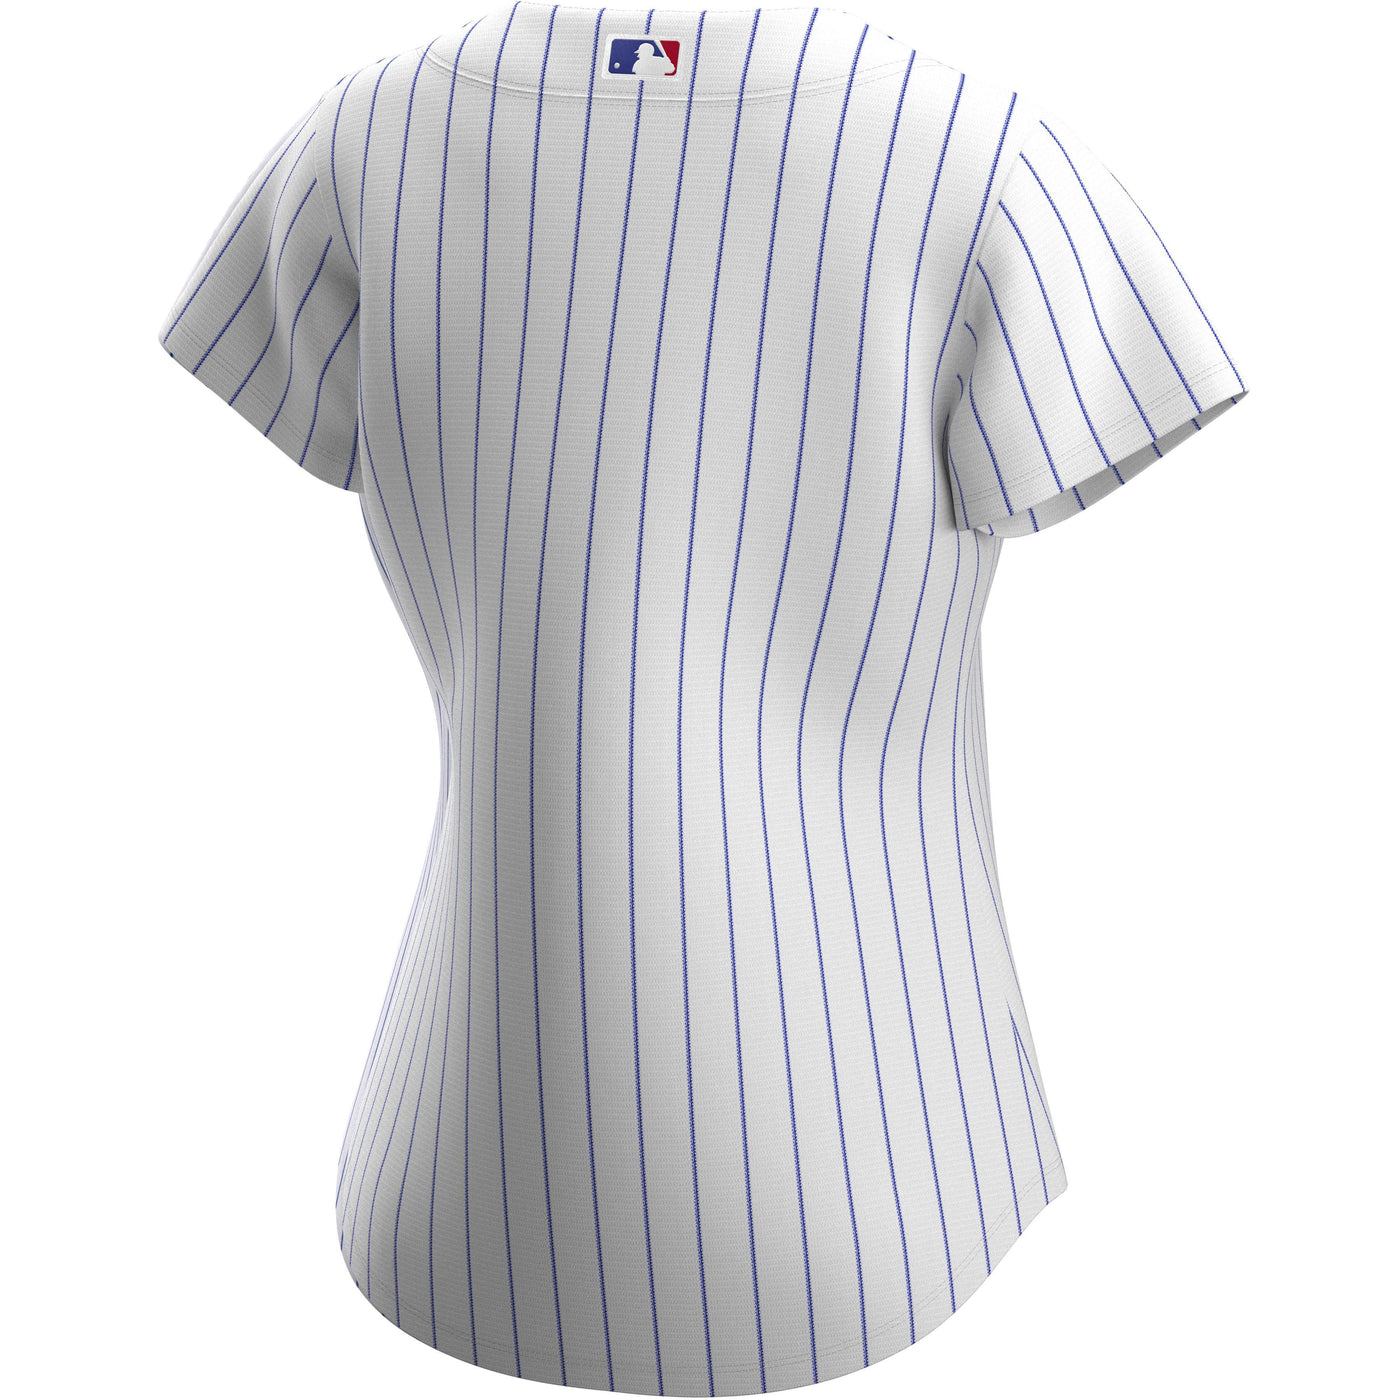 CHICAGO CUBS NIKE MEN'S CITY CONNECT CUSTOMIZABLE REPLICA JERSEY